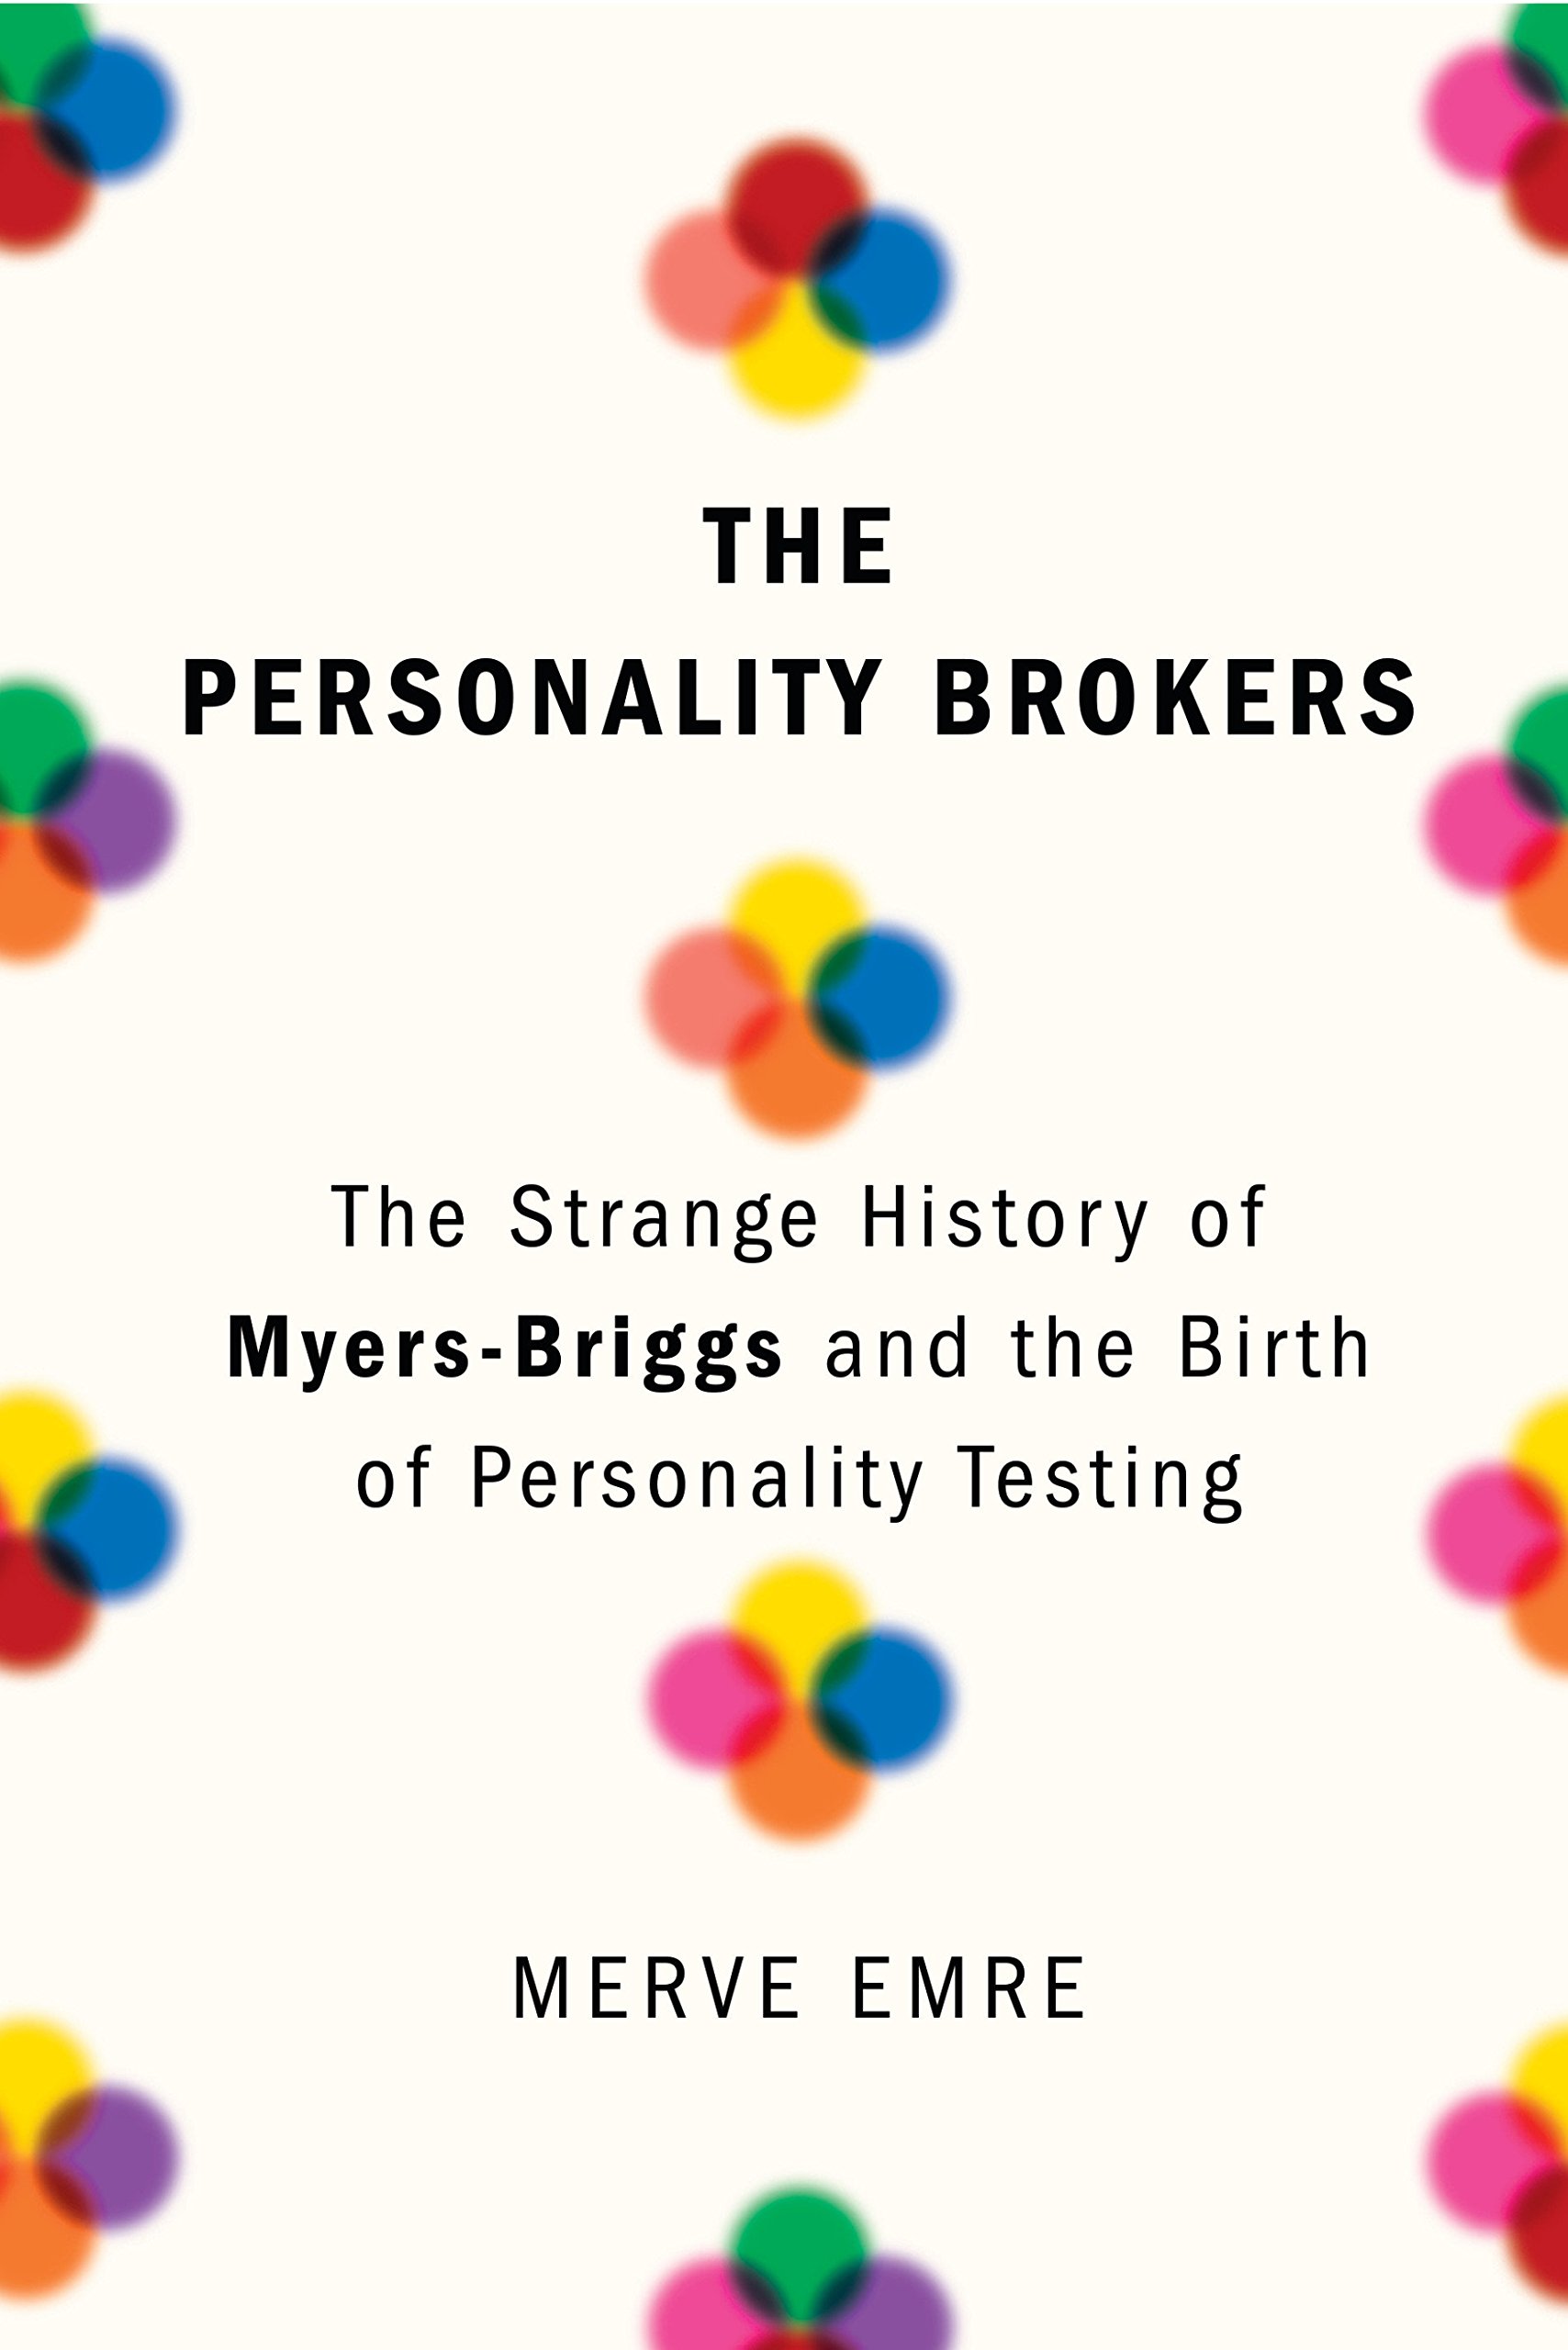 Getting Personal: The Personality Brokers Book on the MBTI Inspires a Fun Look Back